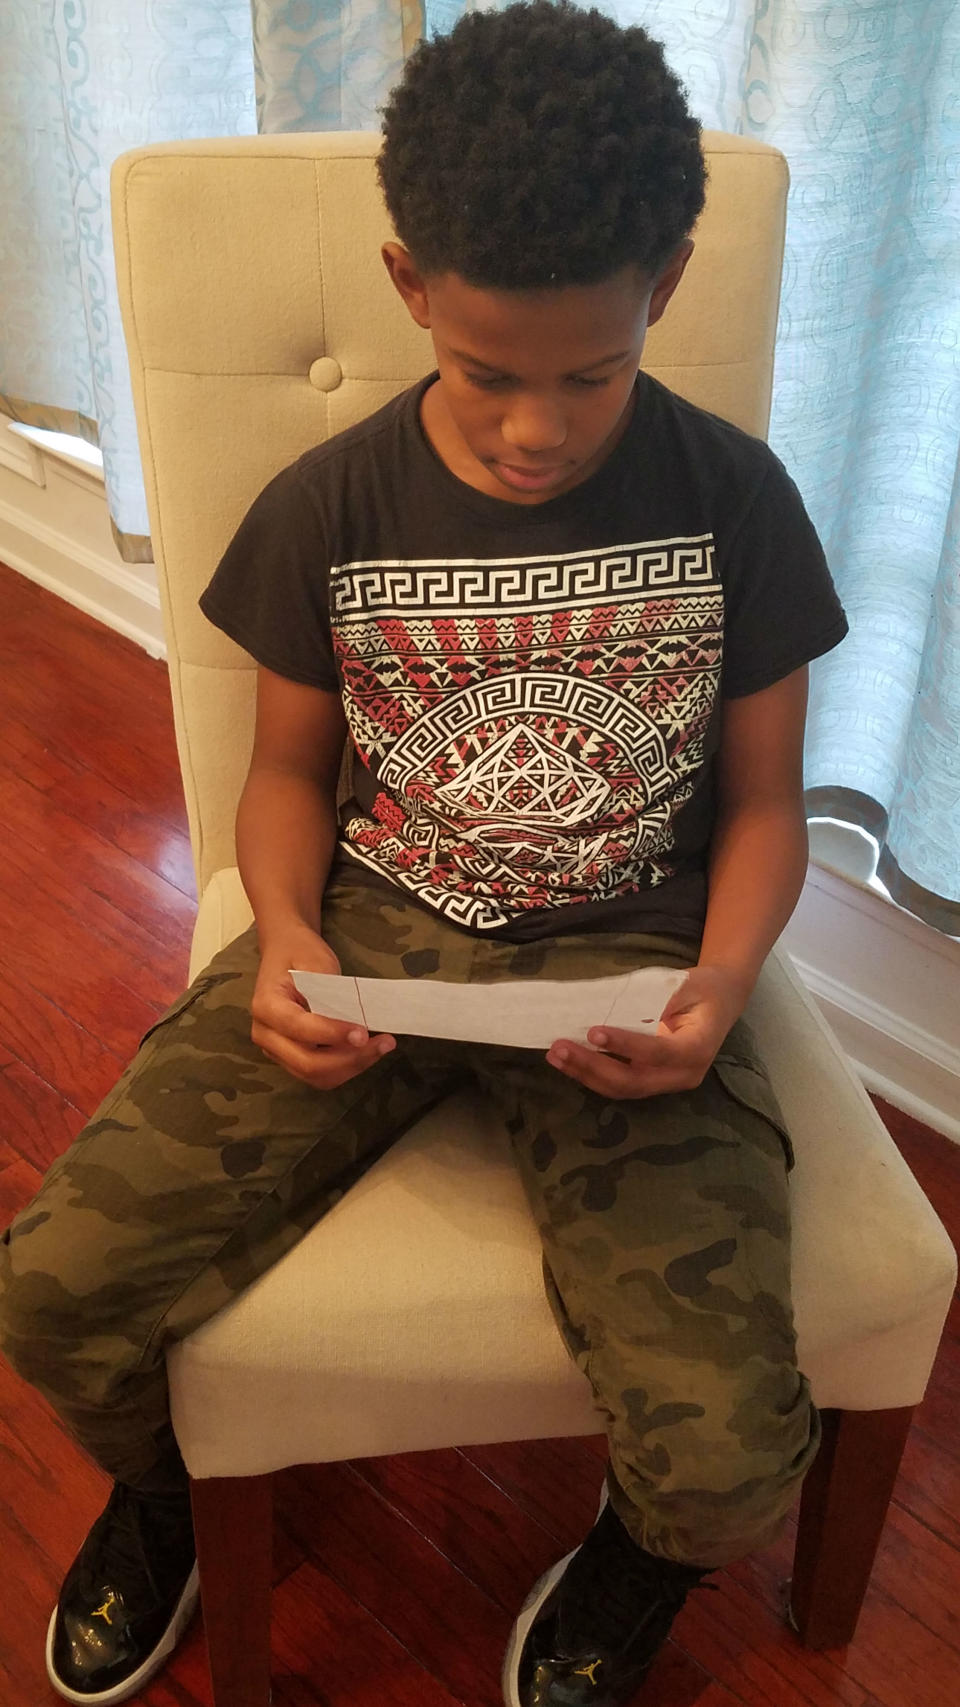 Charles “felt helpless” when her son read his letters to her. (Photo: Claudia Charles)